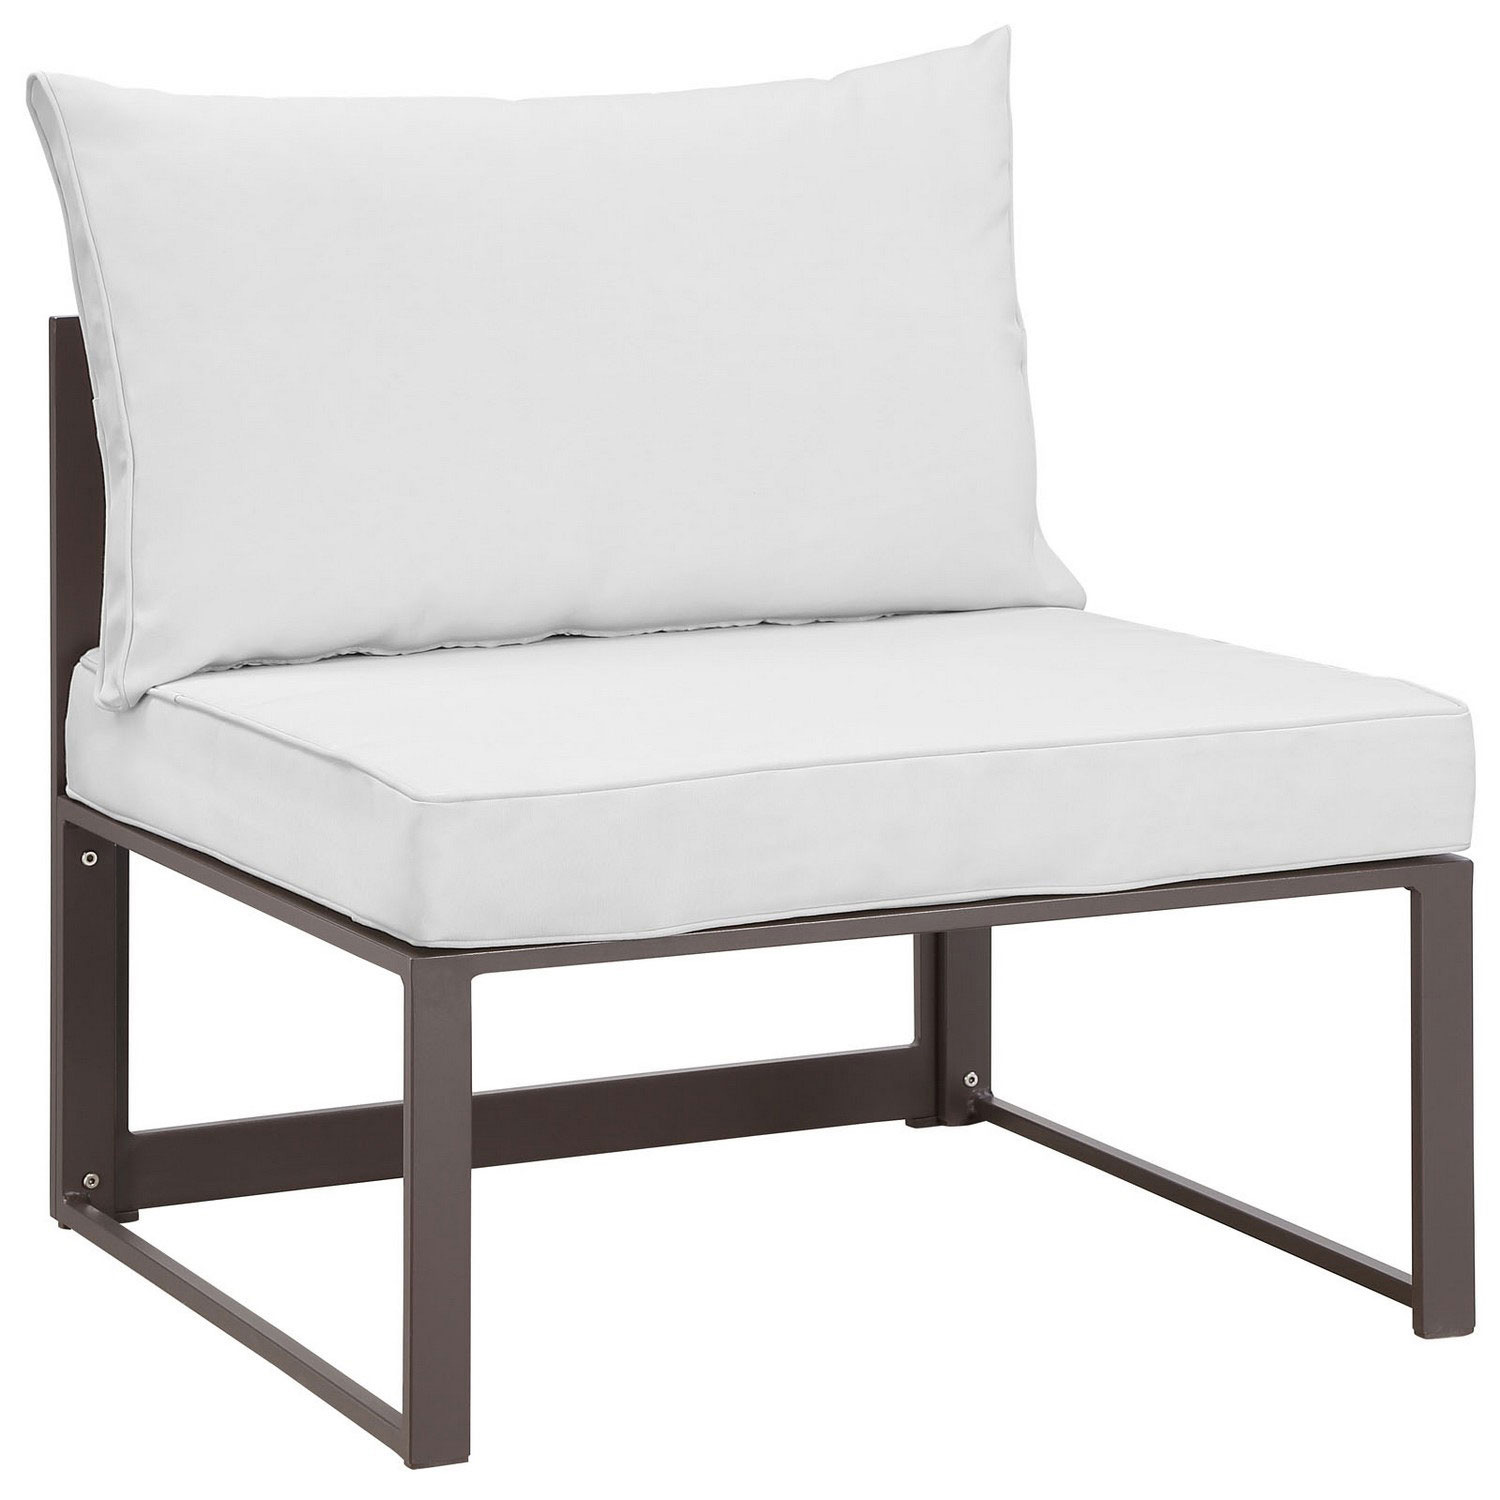 Modway Fortuna Armless Outdoor Patio Sofa - Brown/White